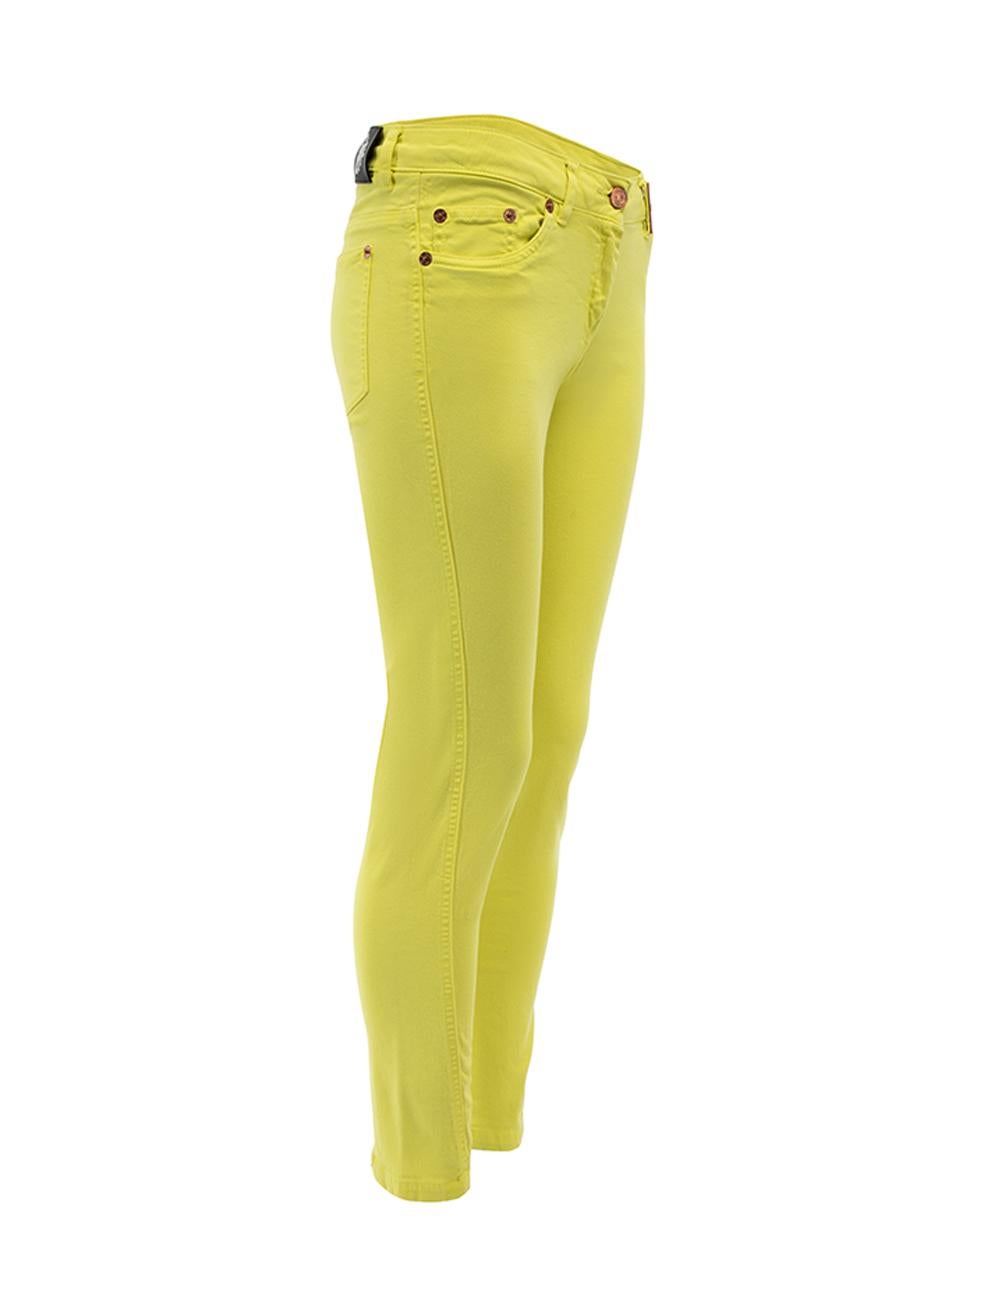 CONDITION is Very good. Minimal wear to jeans is evident. Minimal wear to the button and rosegold hardware. There is also a very small mark near the top of the right jean leg on this used Kenzo designer resale item. 
 
 Details
  Neon yellow
 Denim
